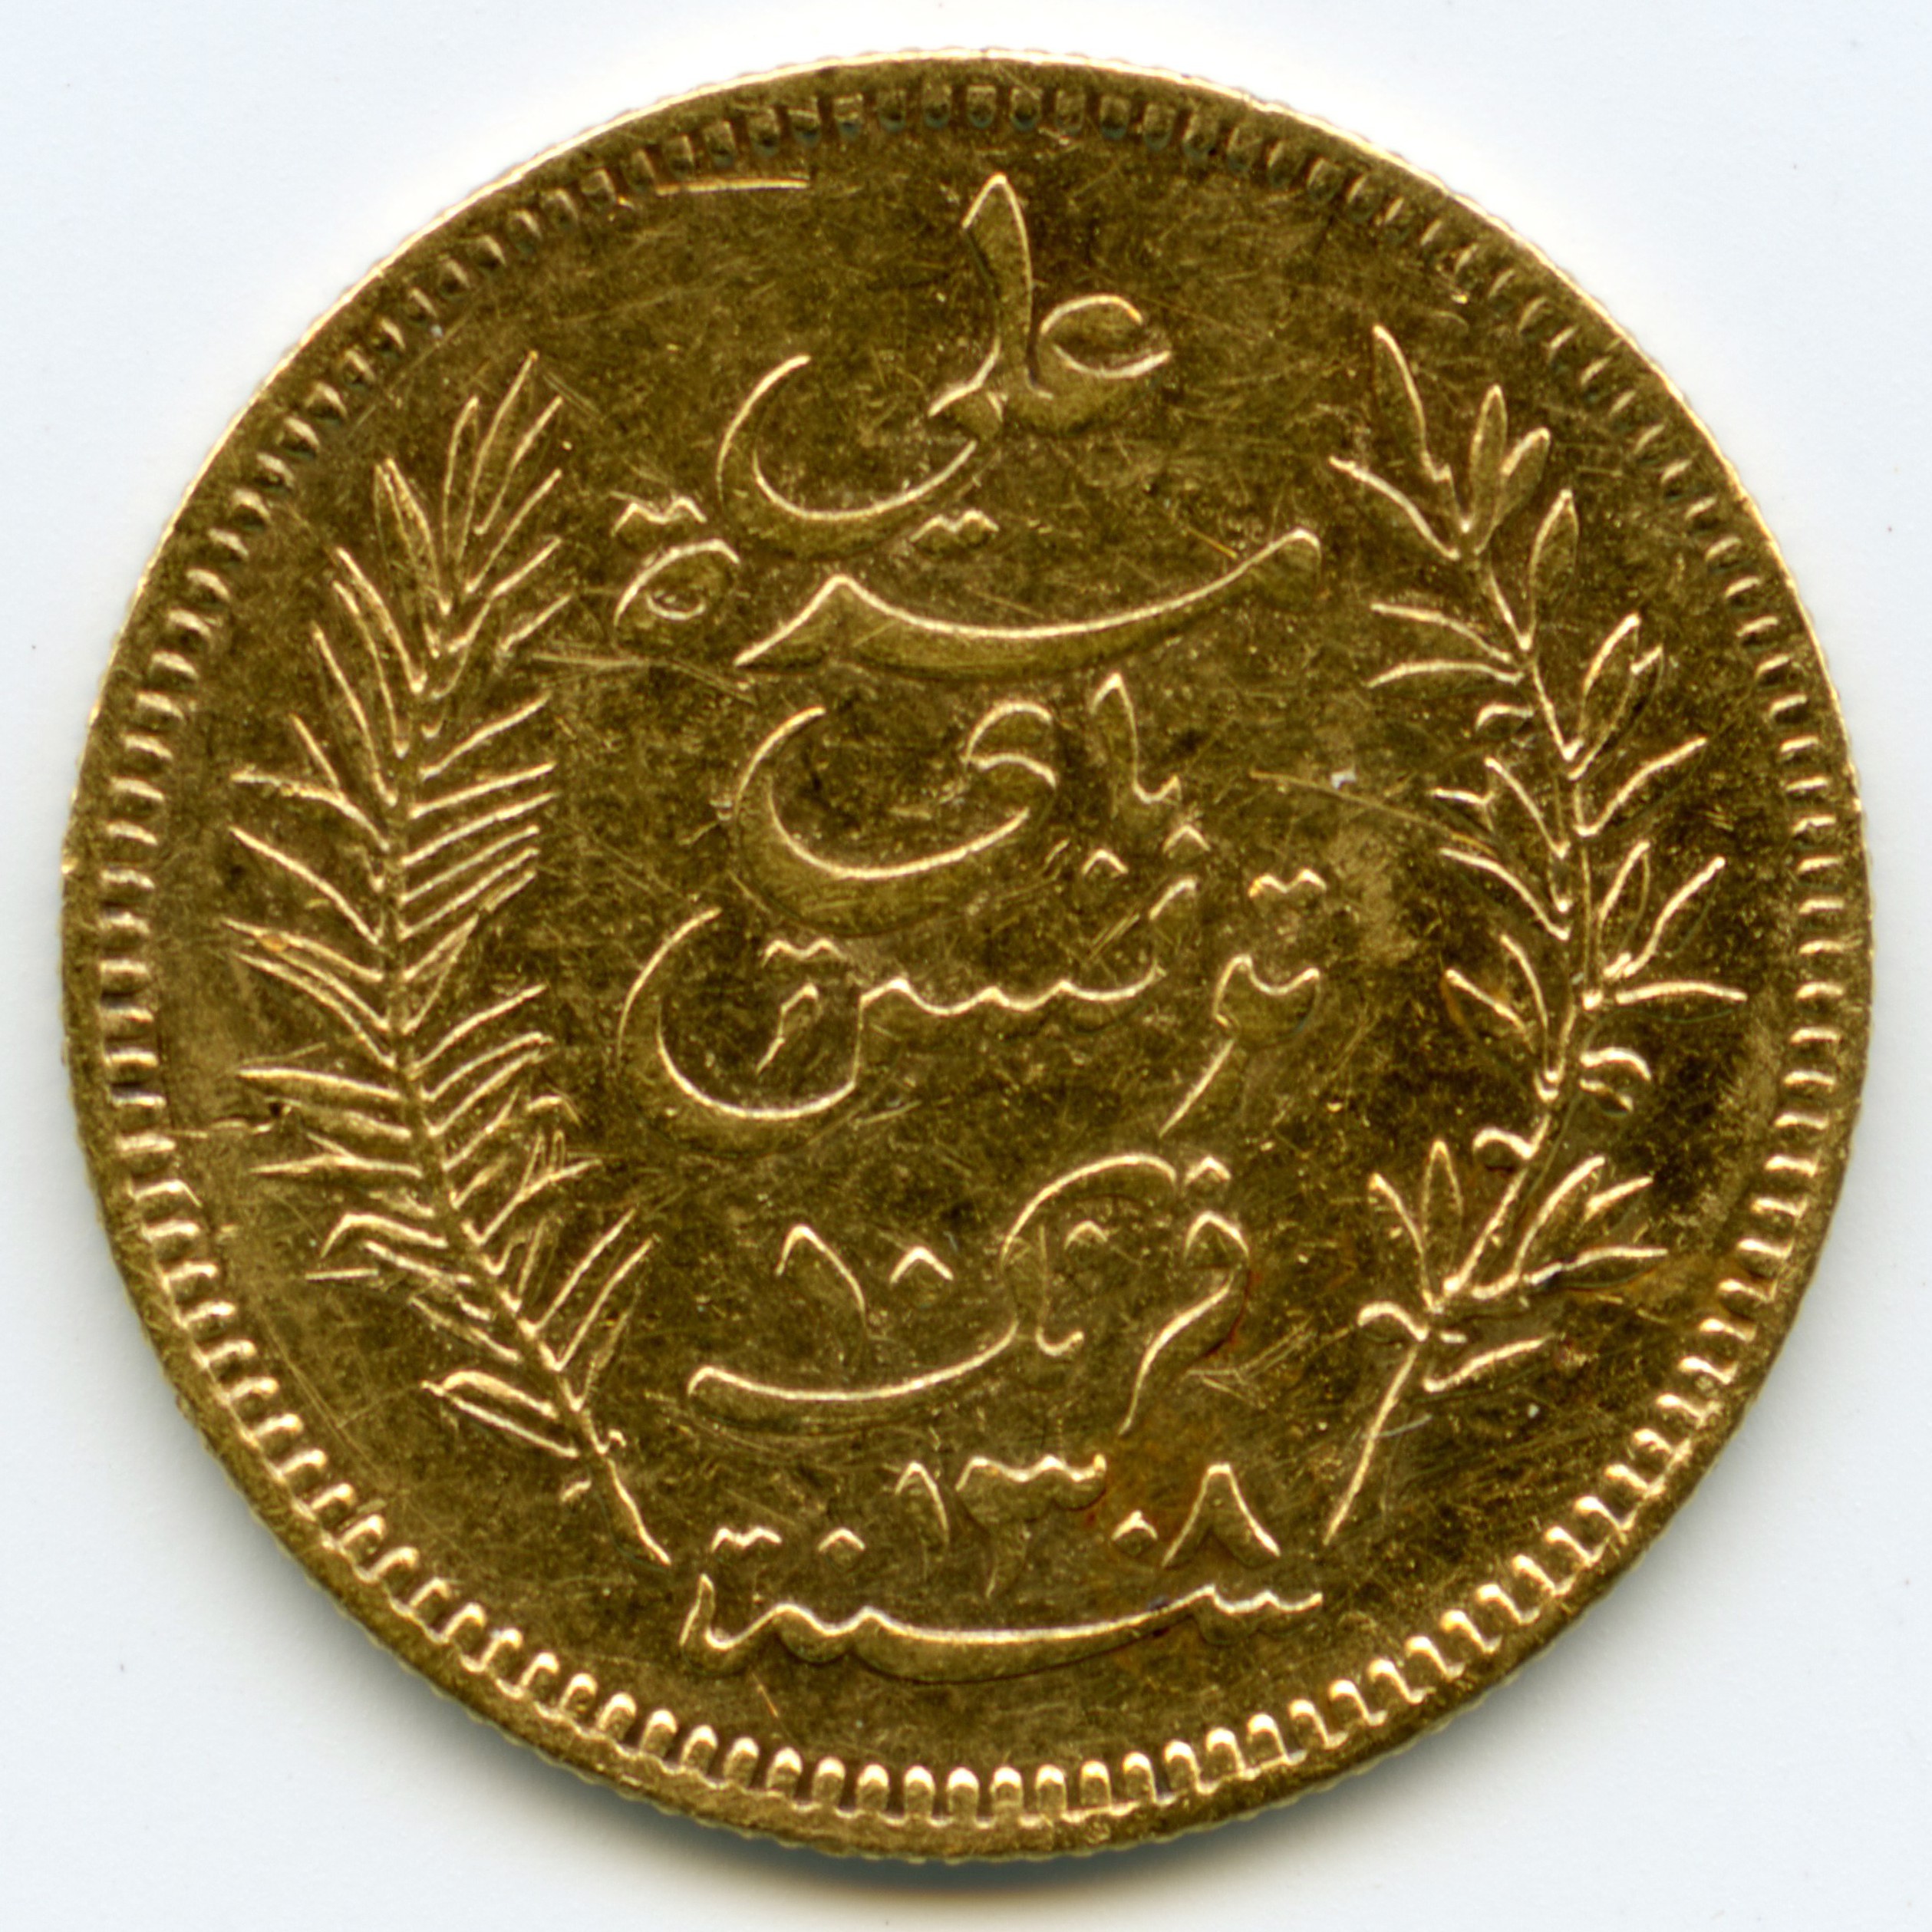 Tunisie - 10 Francs Tunis - 1891 A avers